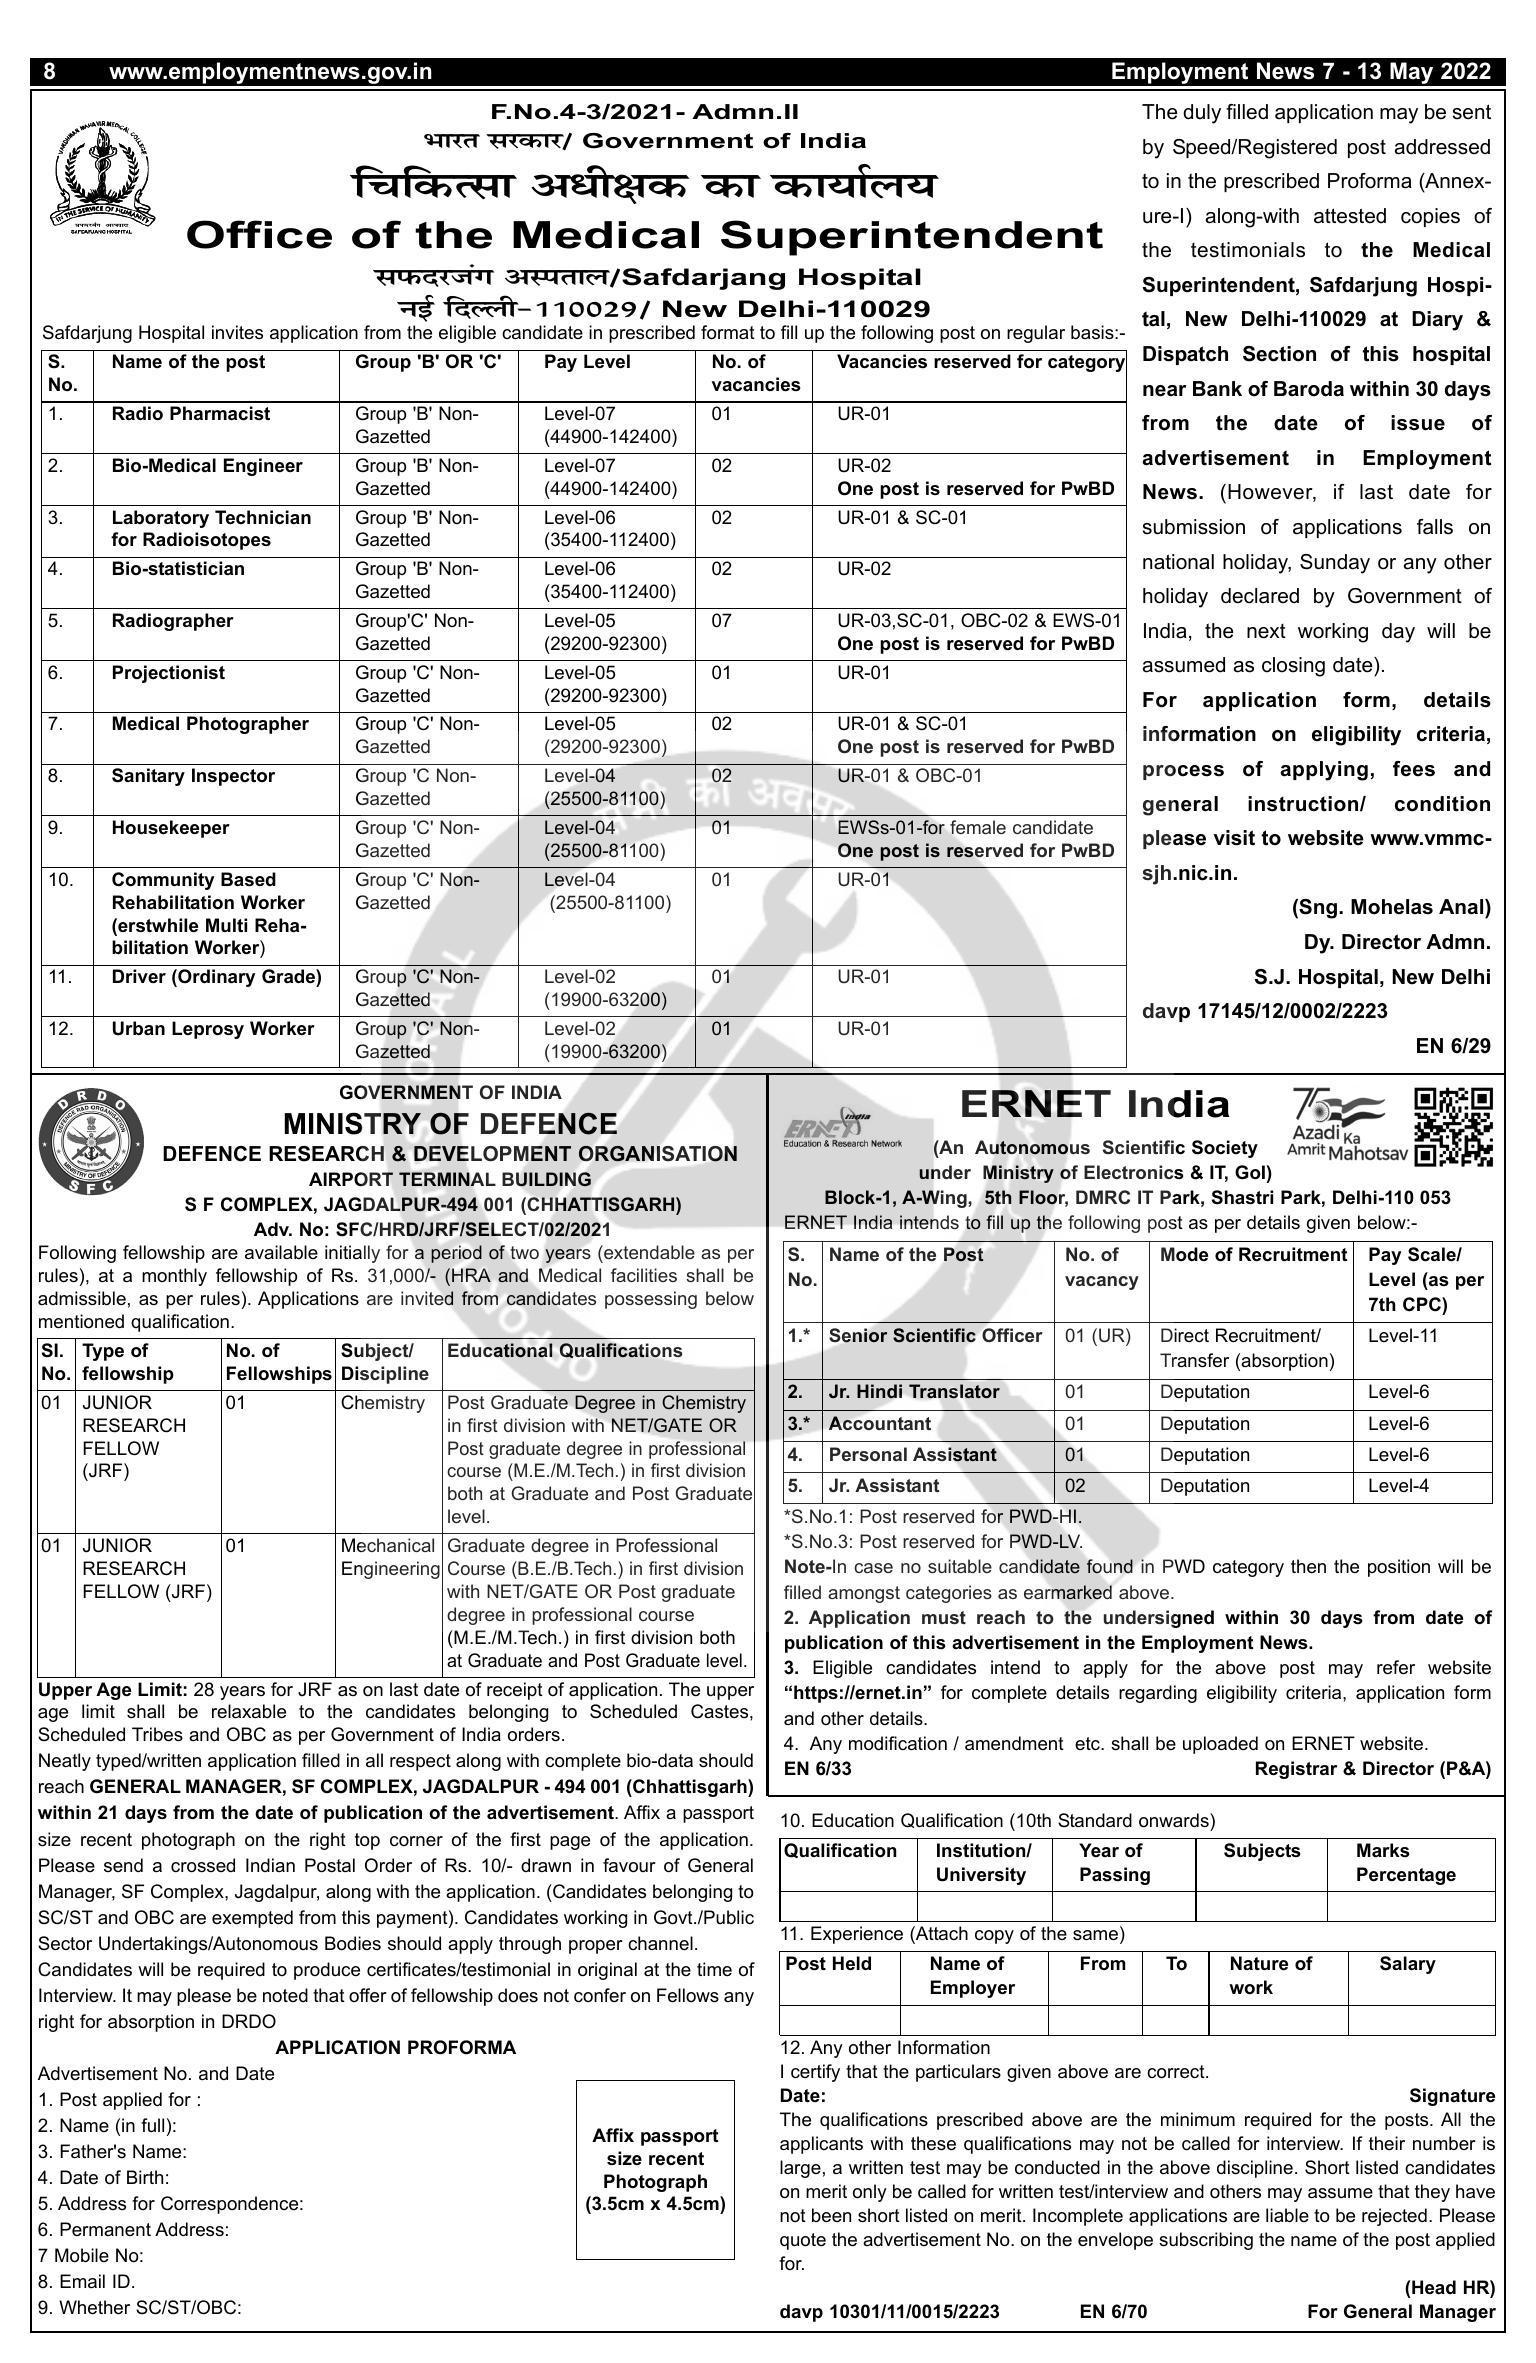 Safdarjung Hospital Recruitment 2022 For 23 Radiographer & Various Vacancy - Page 1